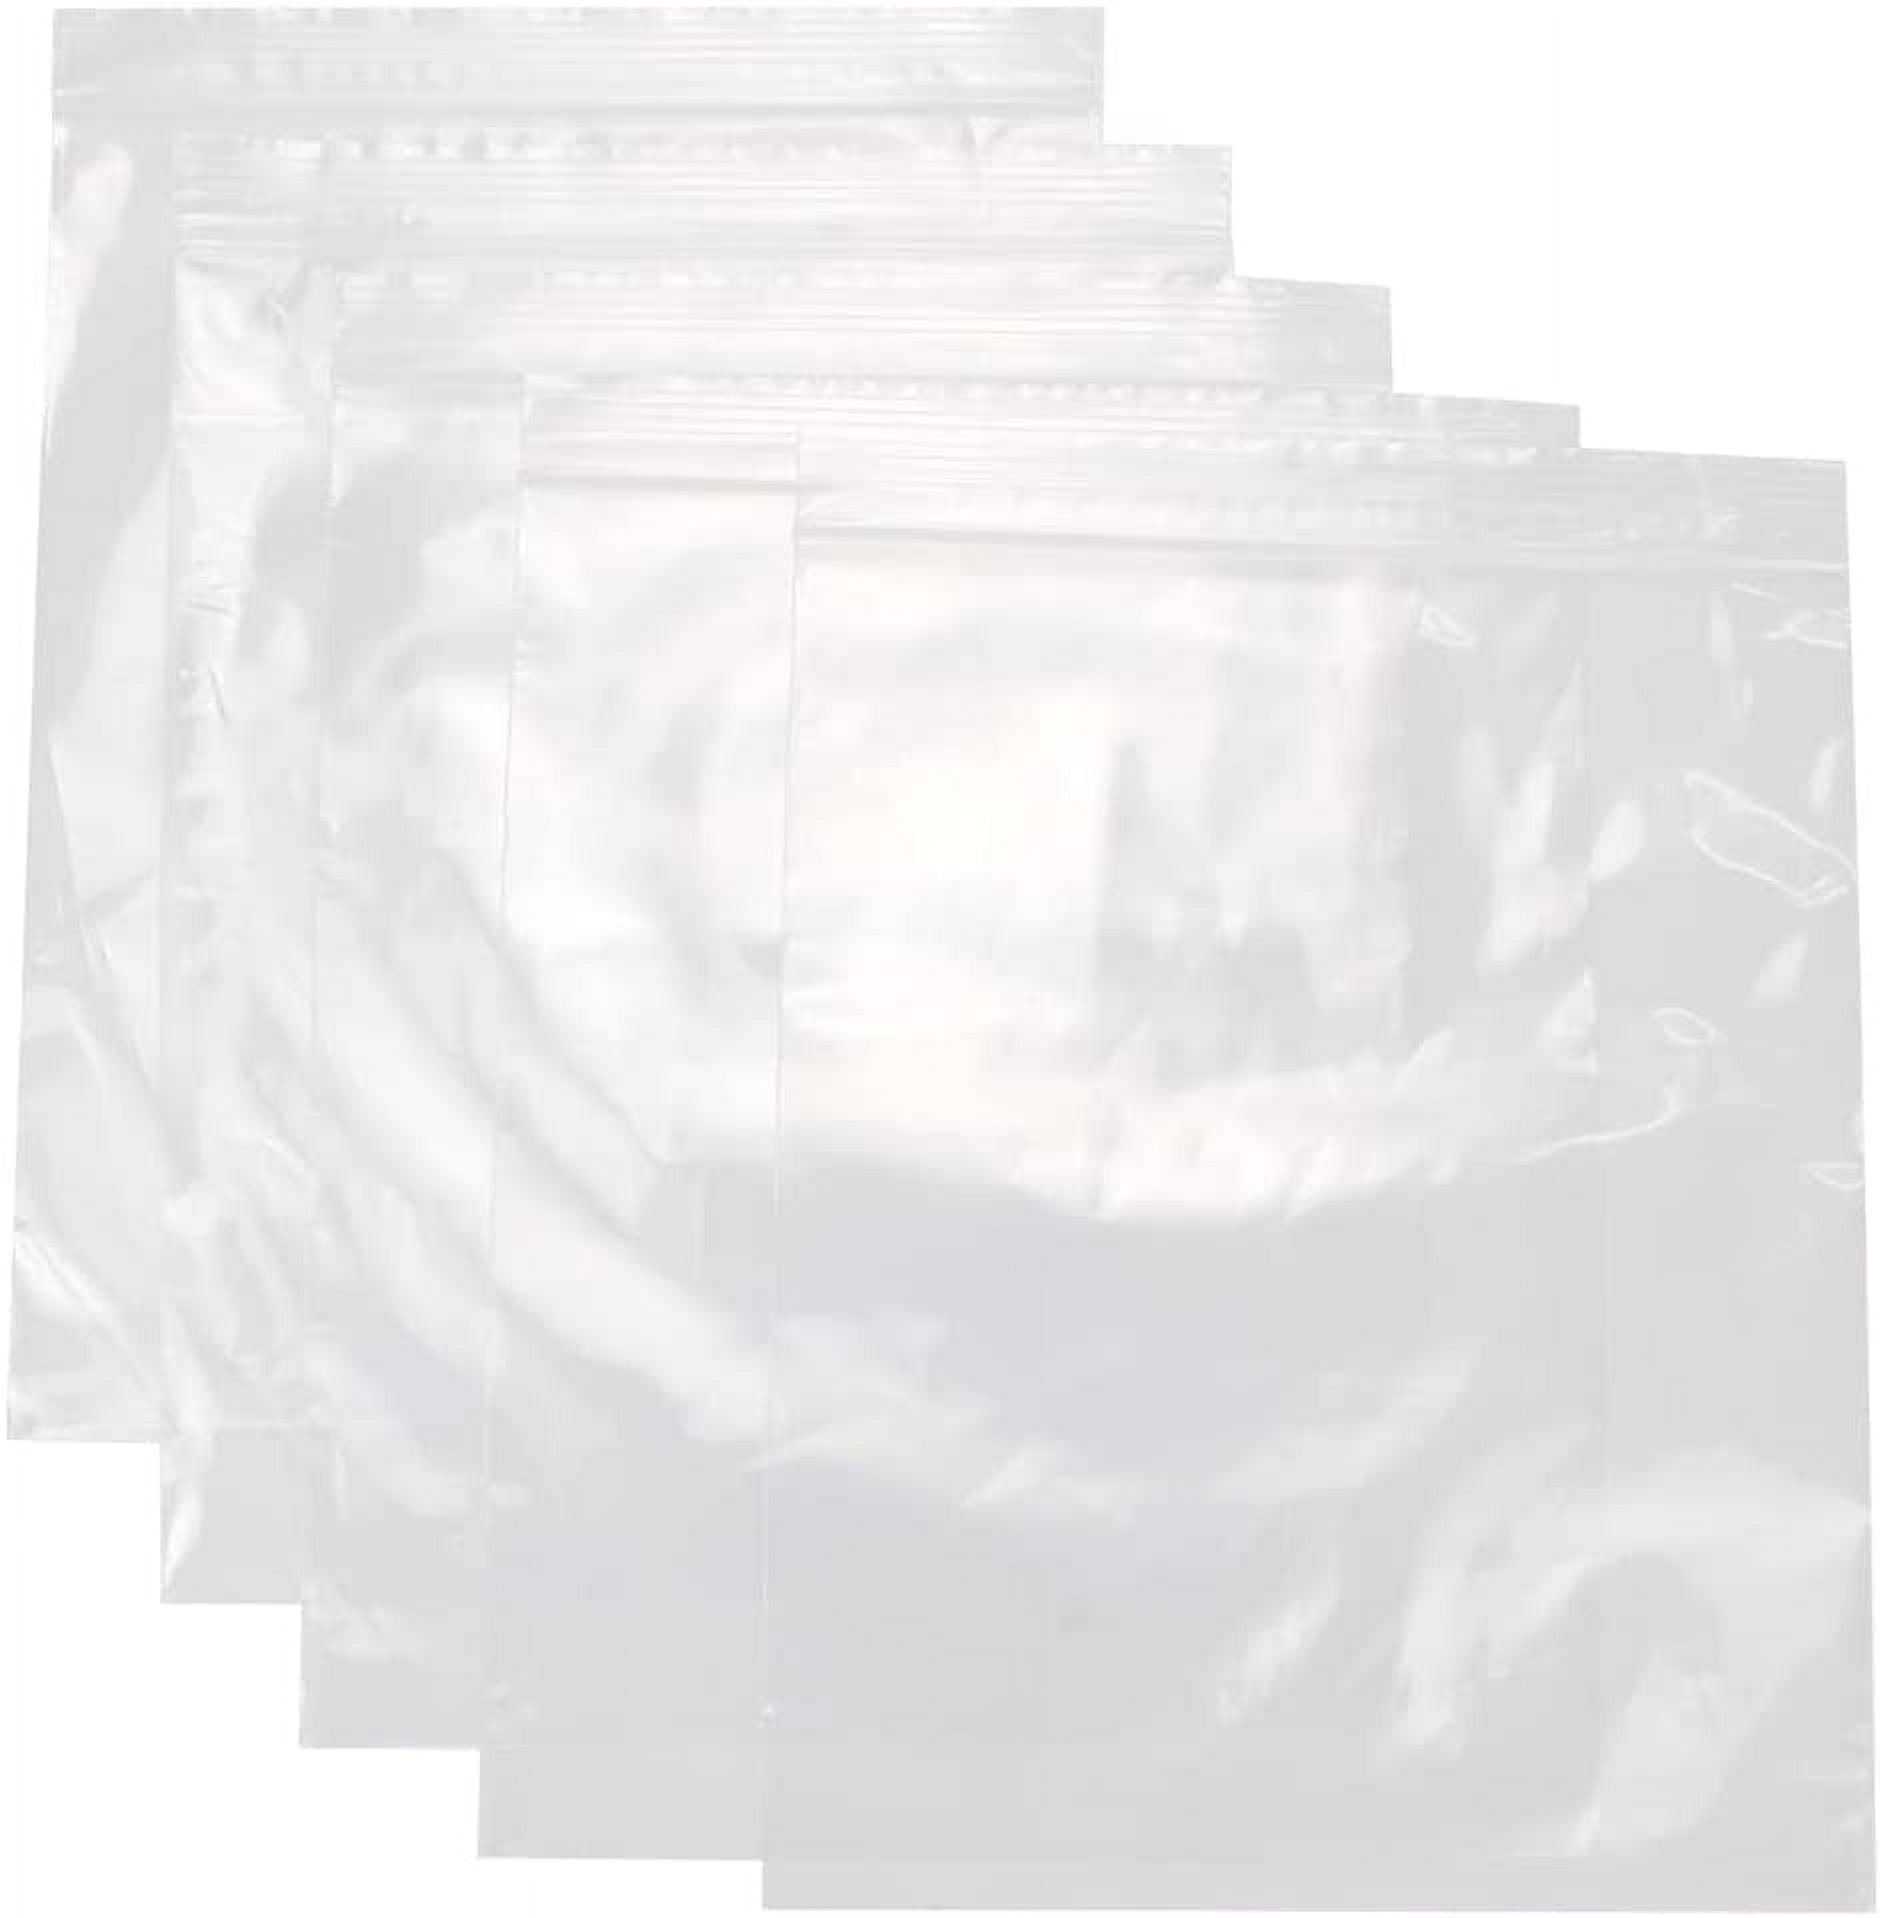 Purevacy Clear Reclosable Bags 12x12, Pack of 50 Plastic Baggies for Jewelry with Handles, Polyethylene 3 Mil Plastic Zip Bags, Waterproof Clear